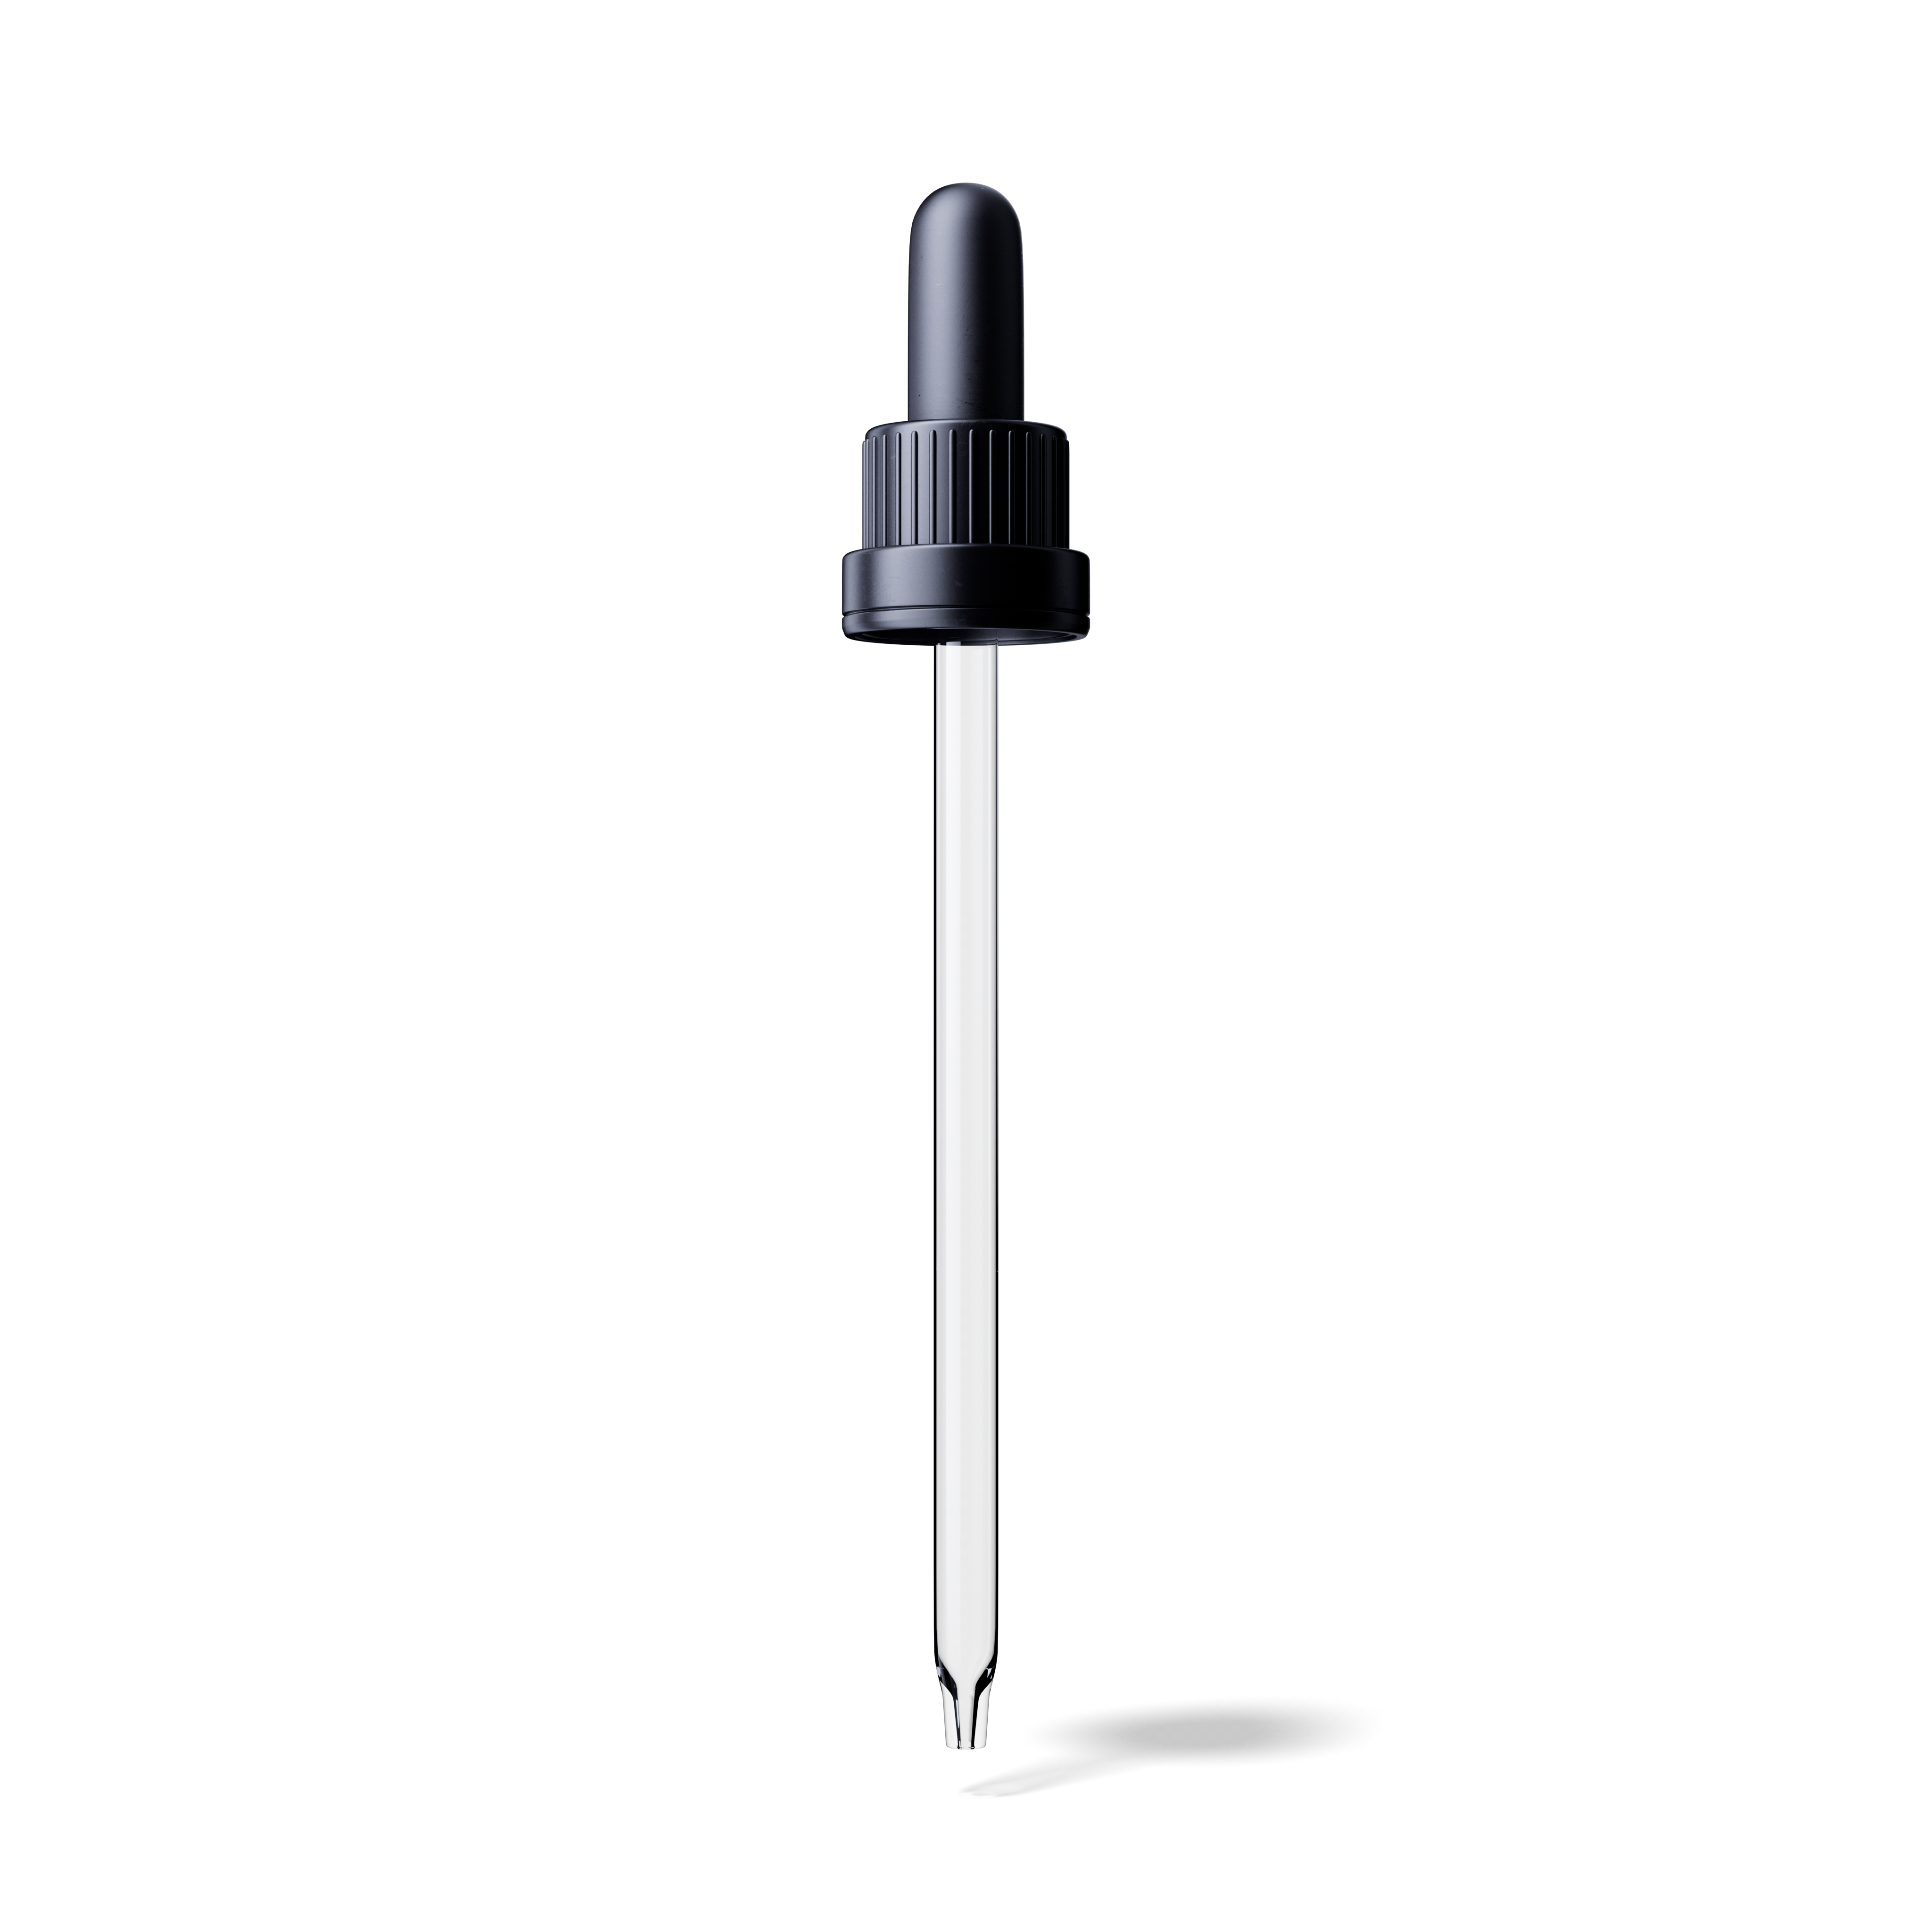 Pipette tamper evident DIN18, III, black, ribbed, bulb NBR, dose 1.0ml, conical tip (Orion 100)